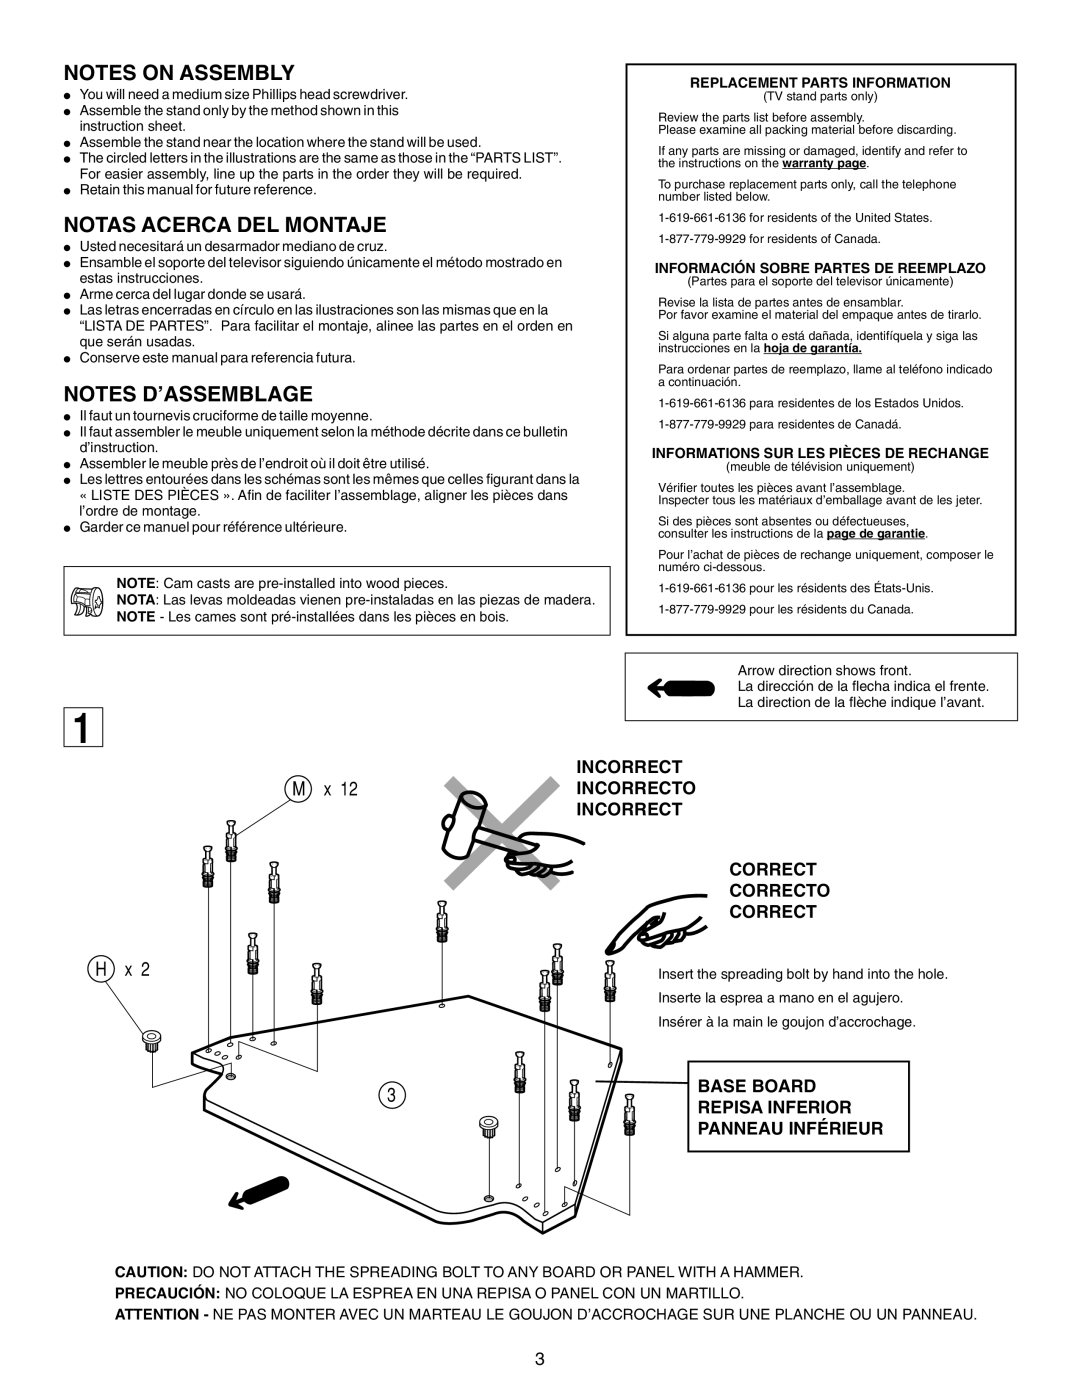 Sony SU-27FS2 manual Notes On Assembly, Notas Acerca Del Montaje, Notes D’Assemblage, H, Replacement Parts Information 